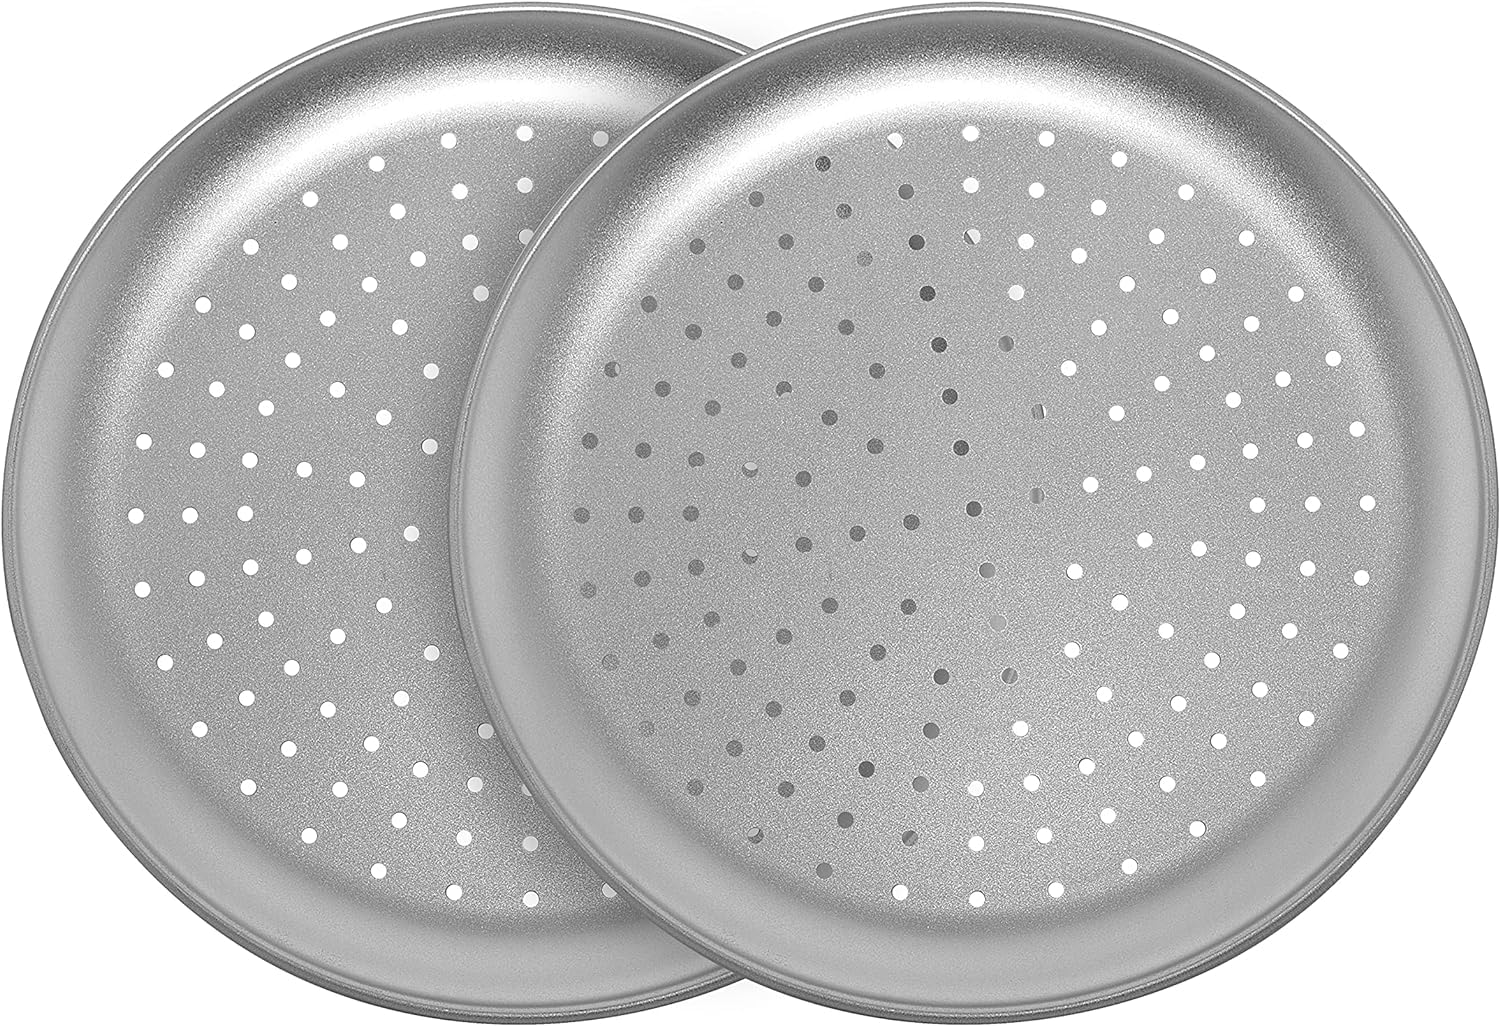 Grill Sensations G & S Metal Products Company 12-inch Pizza Pans, Set of 2